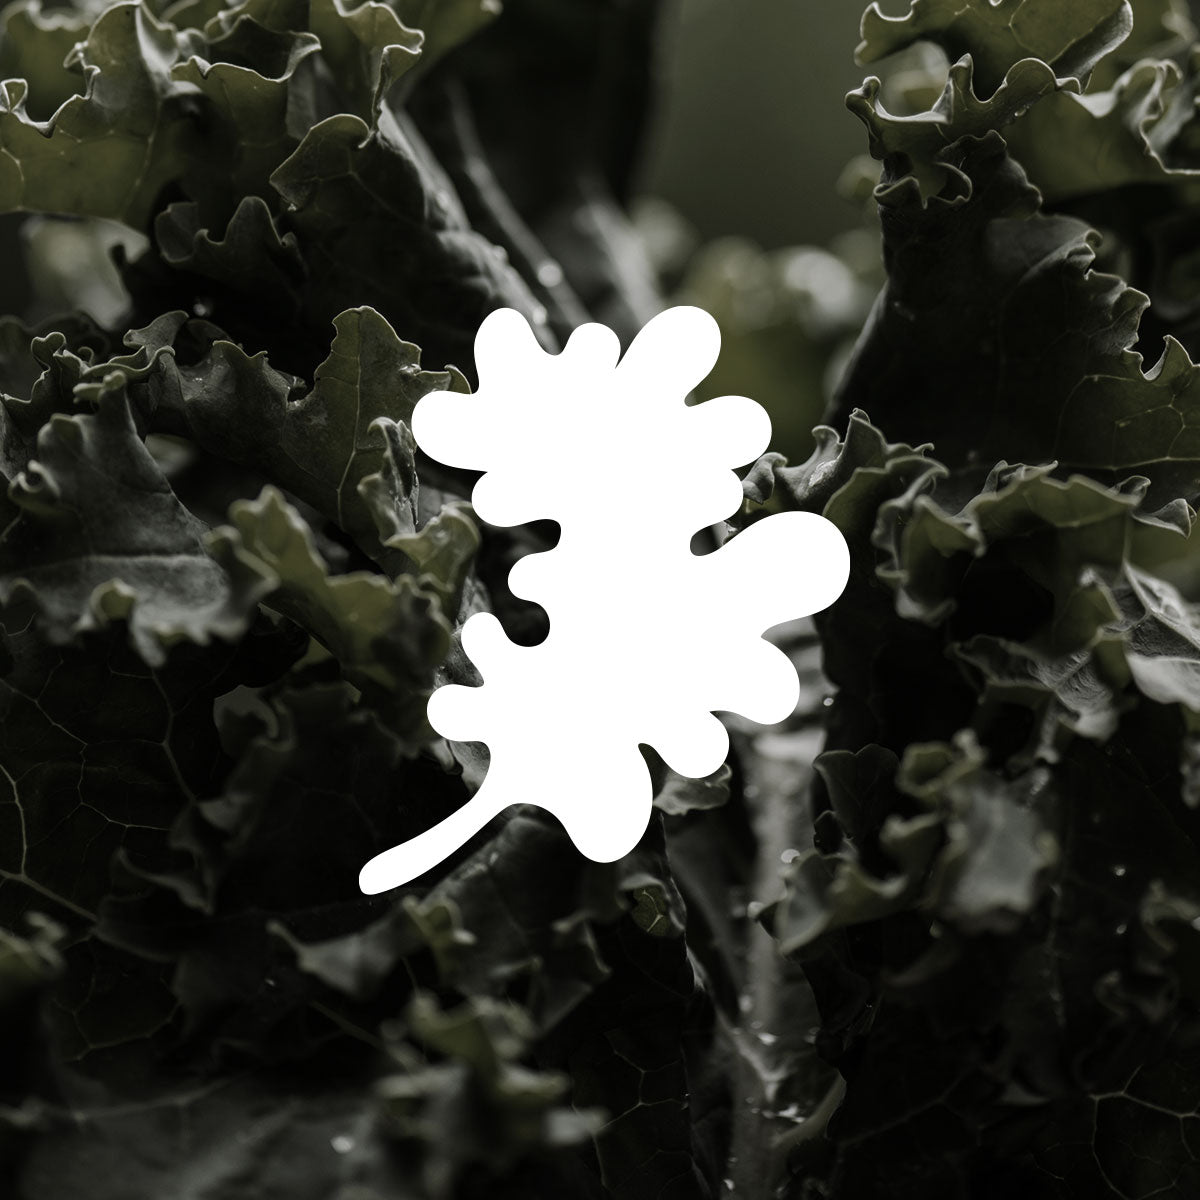 Clover kale illustration shown with photo of kale leaves